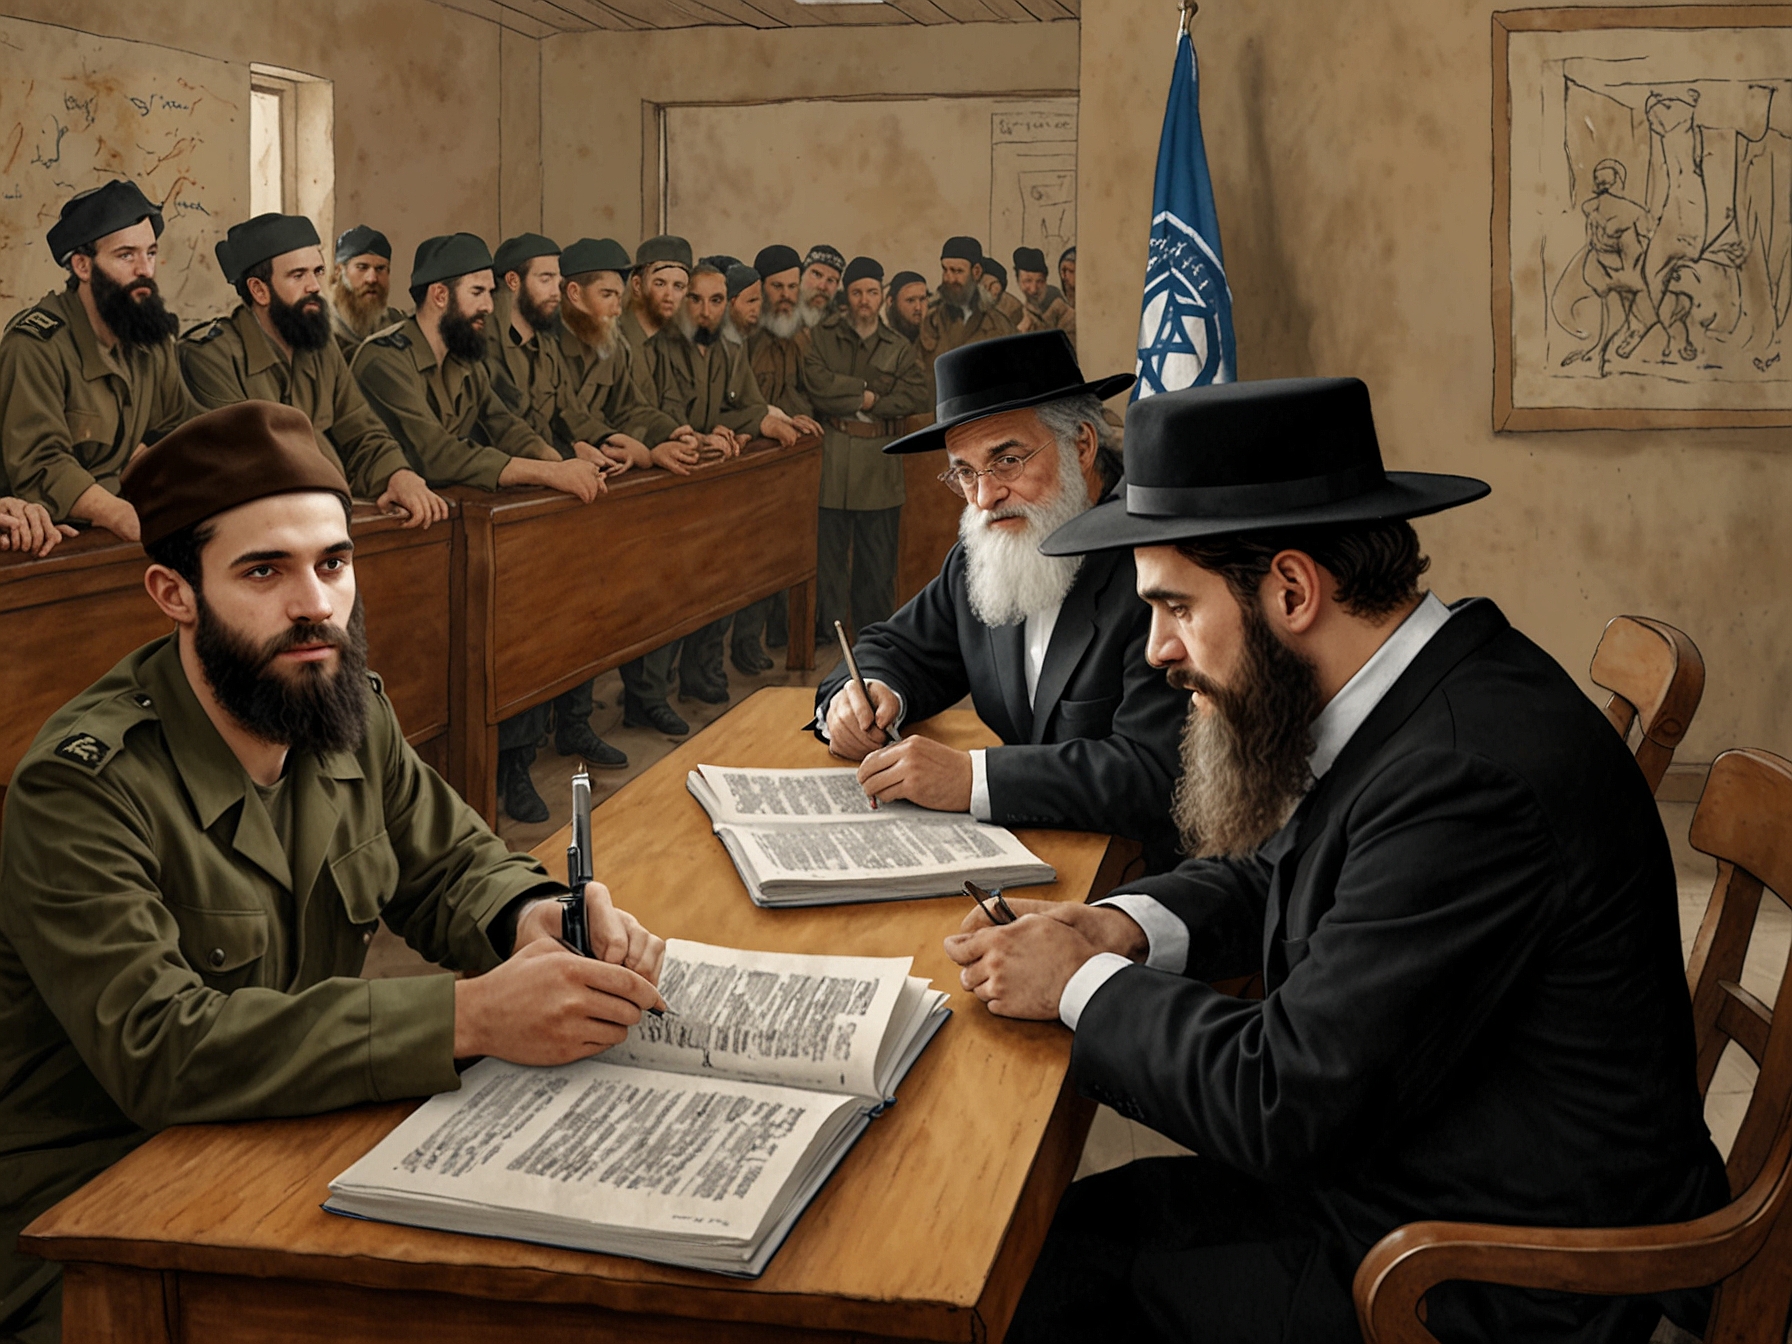 A graphic illustrating a split between Haredi Jews engrossed in Torah study on one side and IDF soldiers on the other, symbolizing the ideological divide on military service.